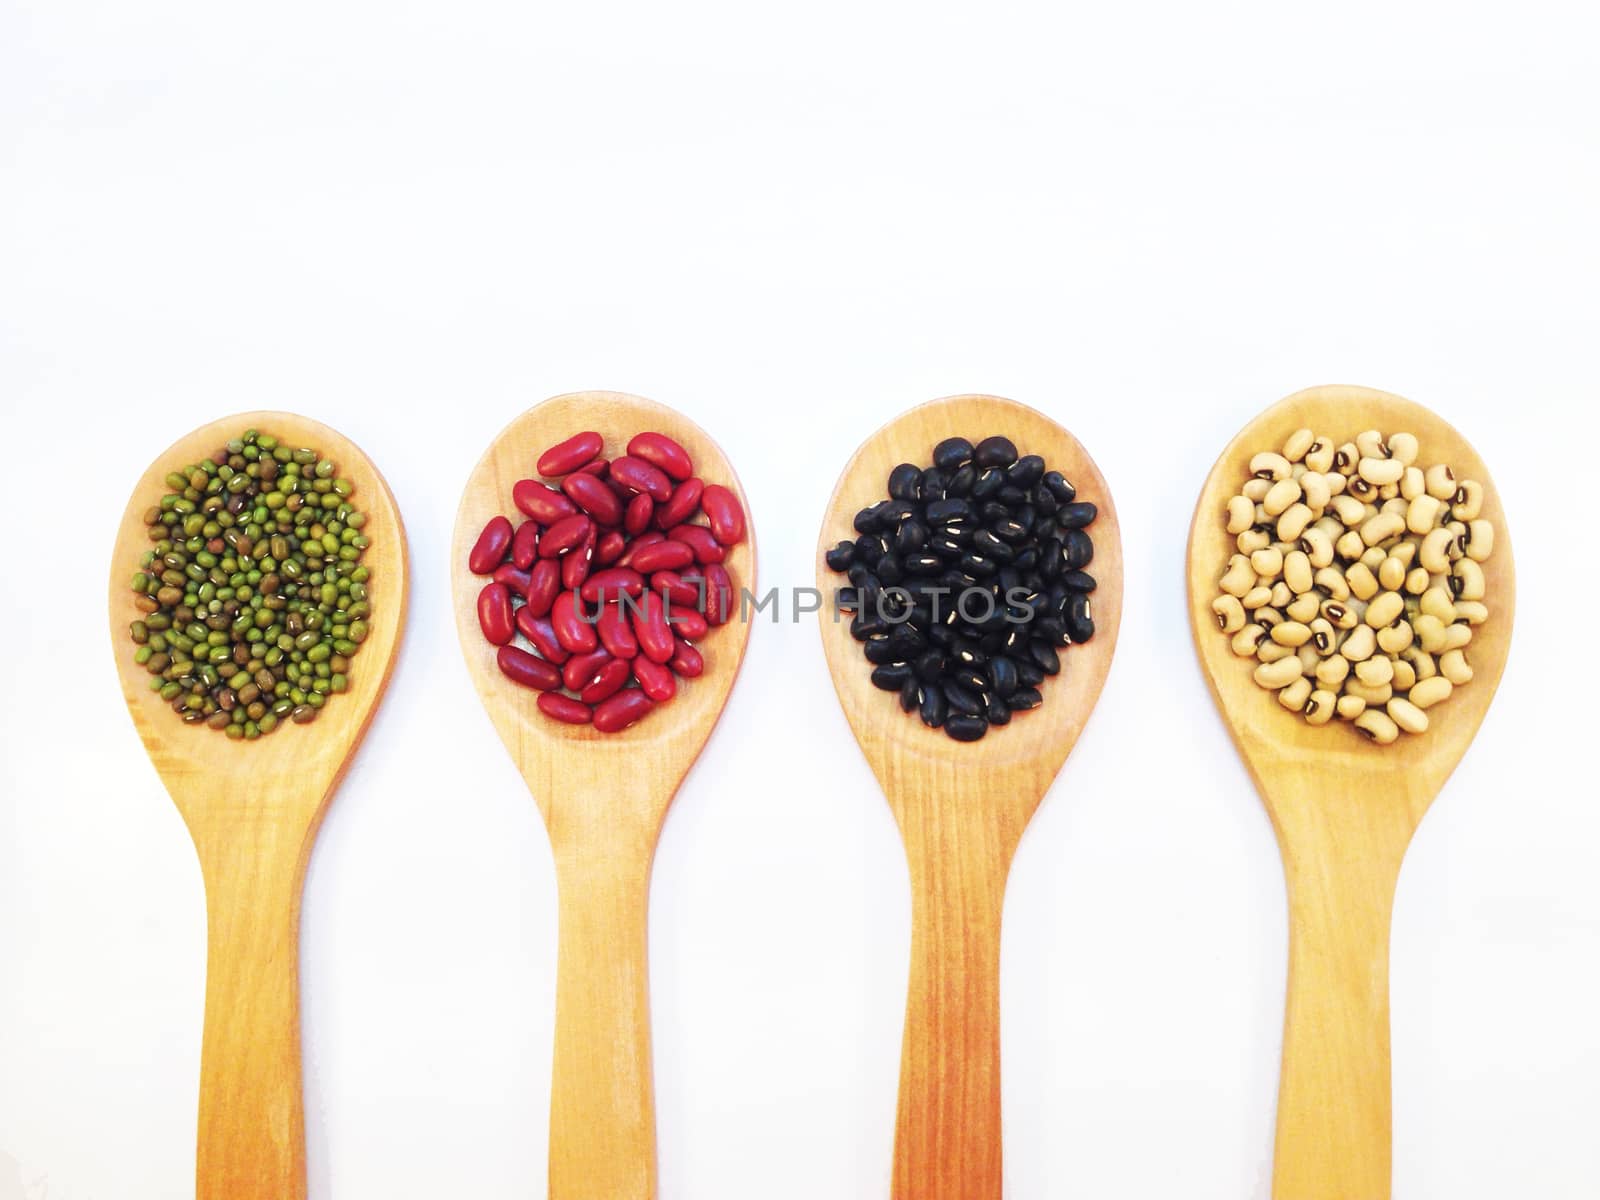 Black eye peas, mung beans, black beans and red kidney beans and by Bowonpat